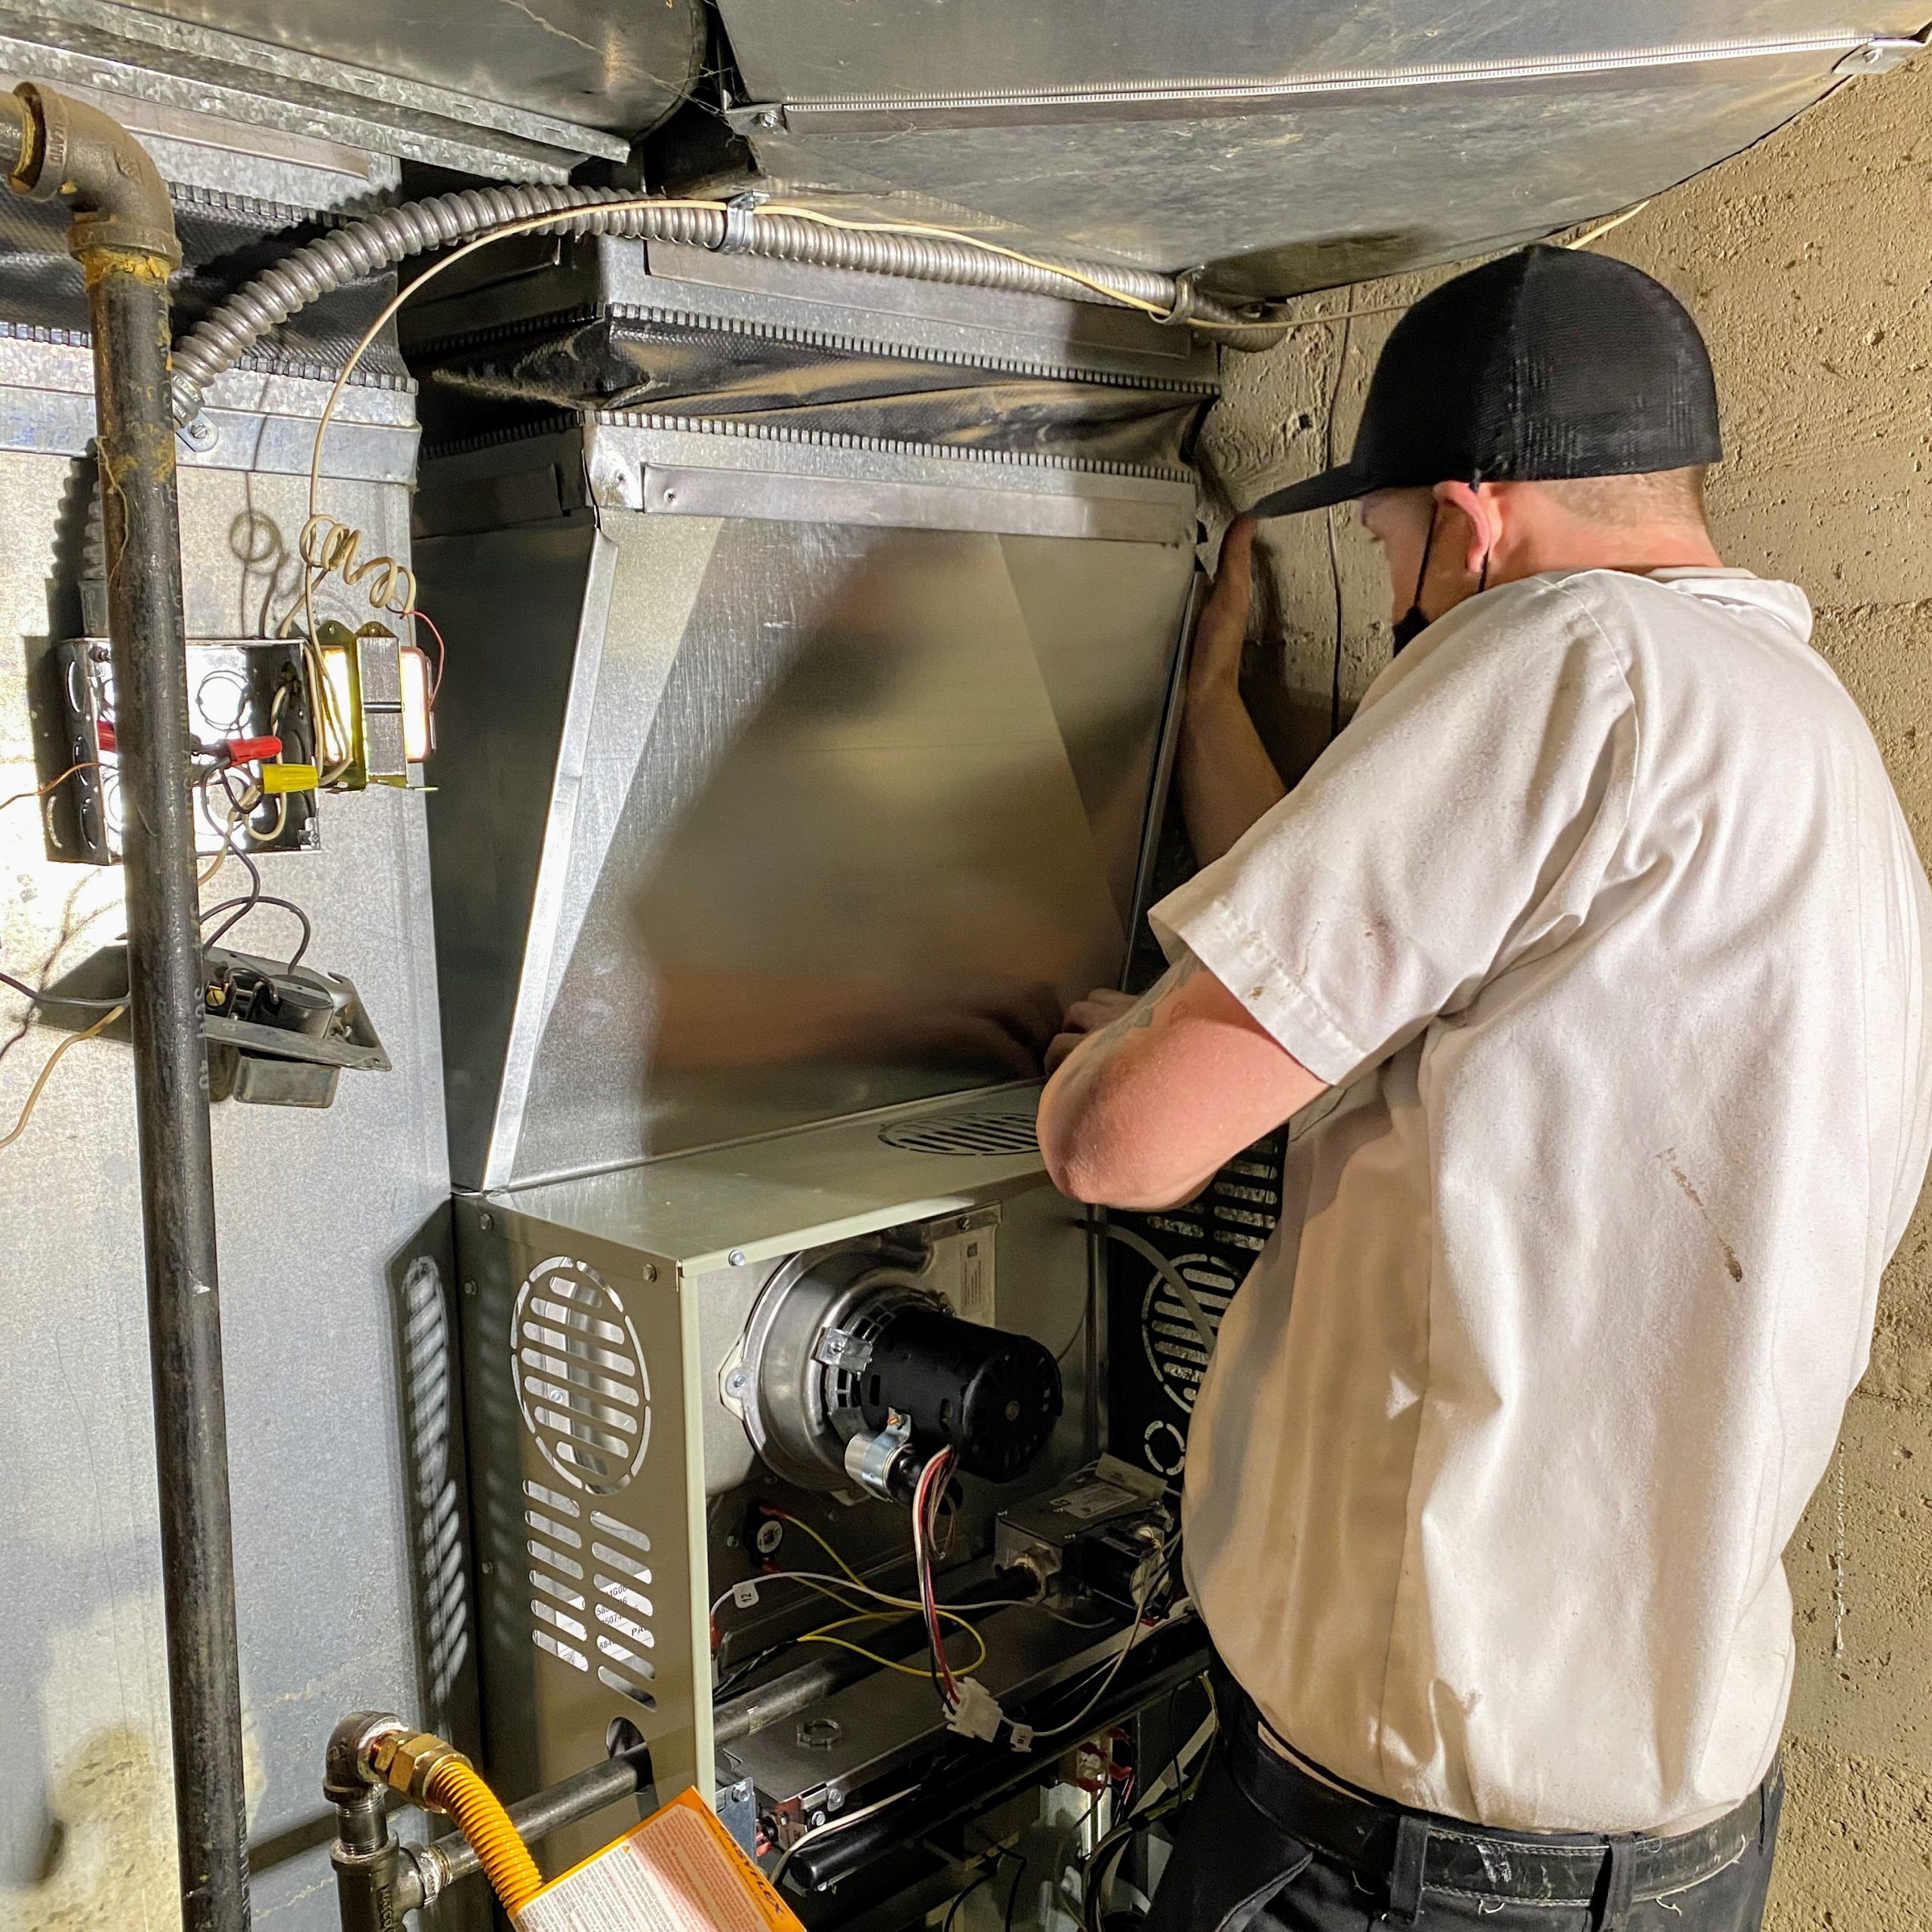 Furnace Maintenance in Golden, CO from Fix-it 24/7 Plumbing, Heating, Air & Electric